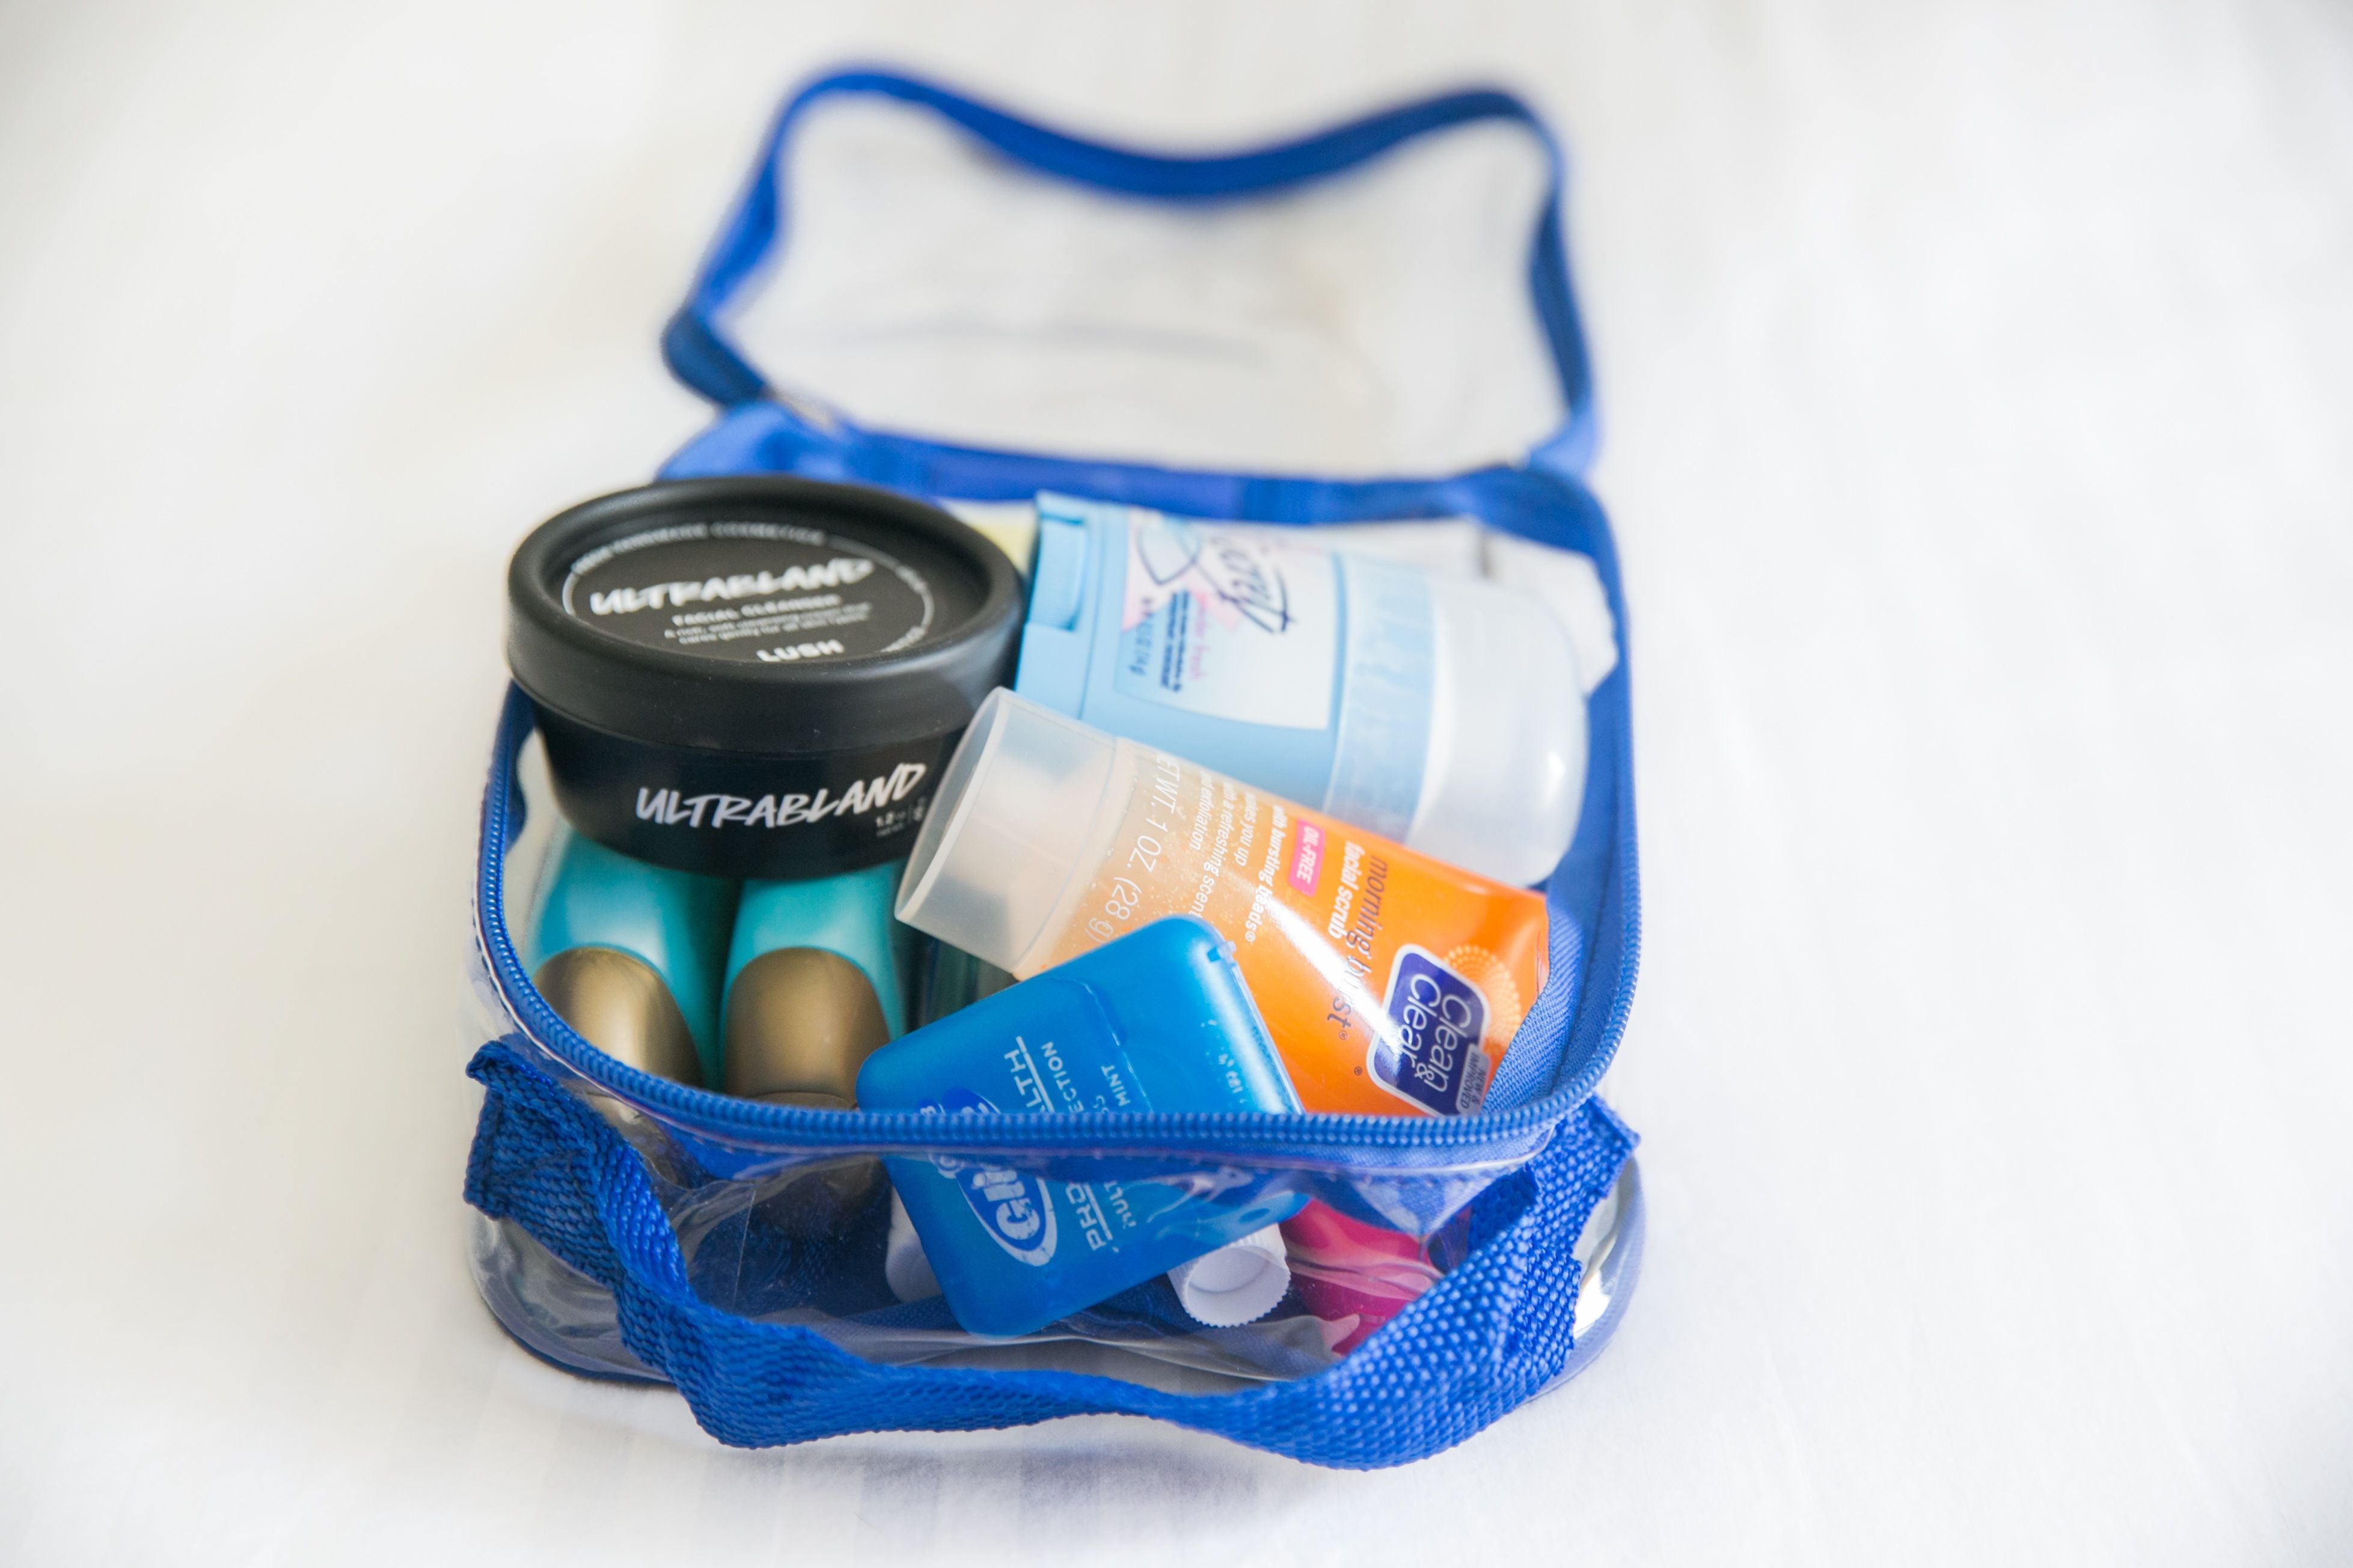 Toiletries packed in an extra small packing cube